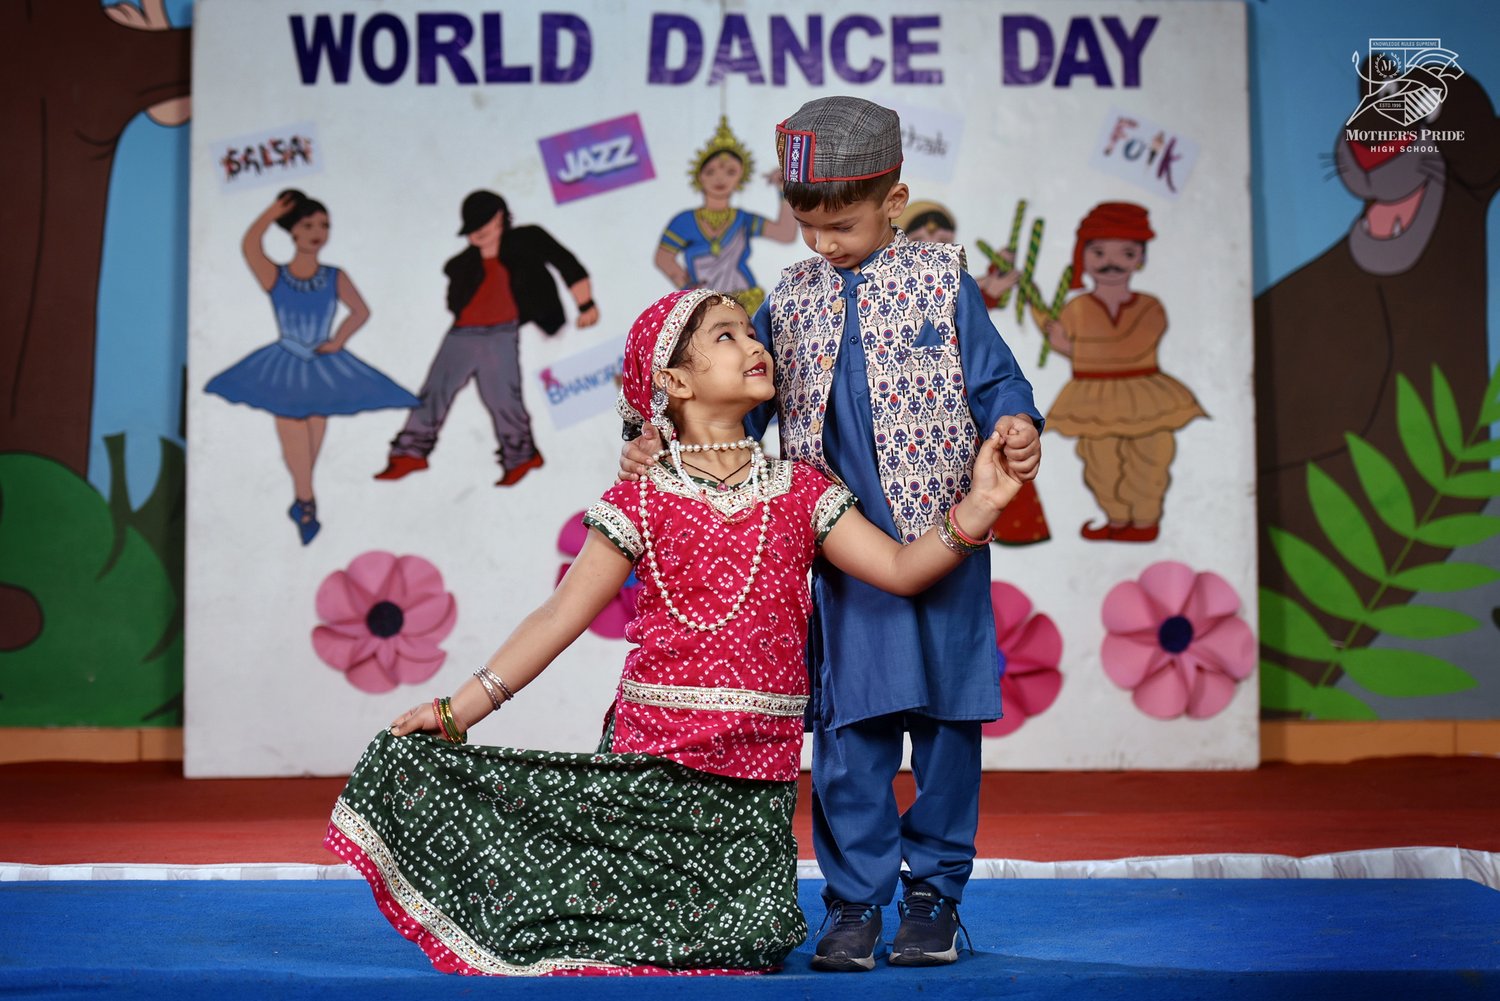 WORLD DANCE DAY: CELEBRATING THE HIDDEN LANGUAGE OF THE SOUL